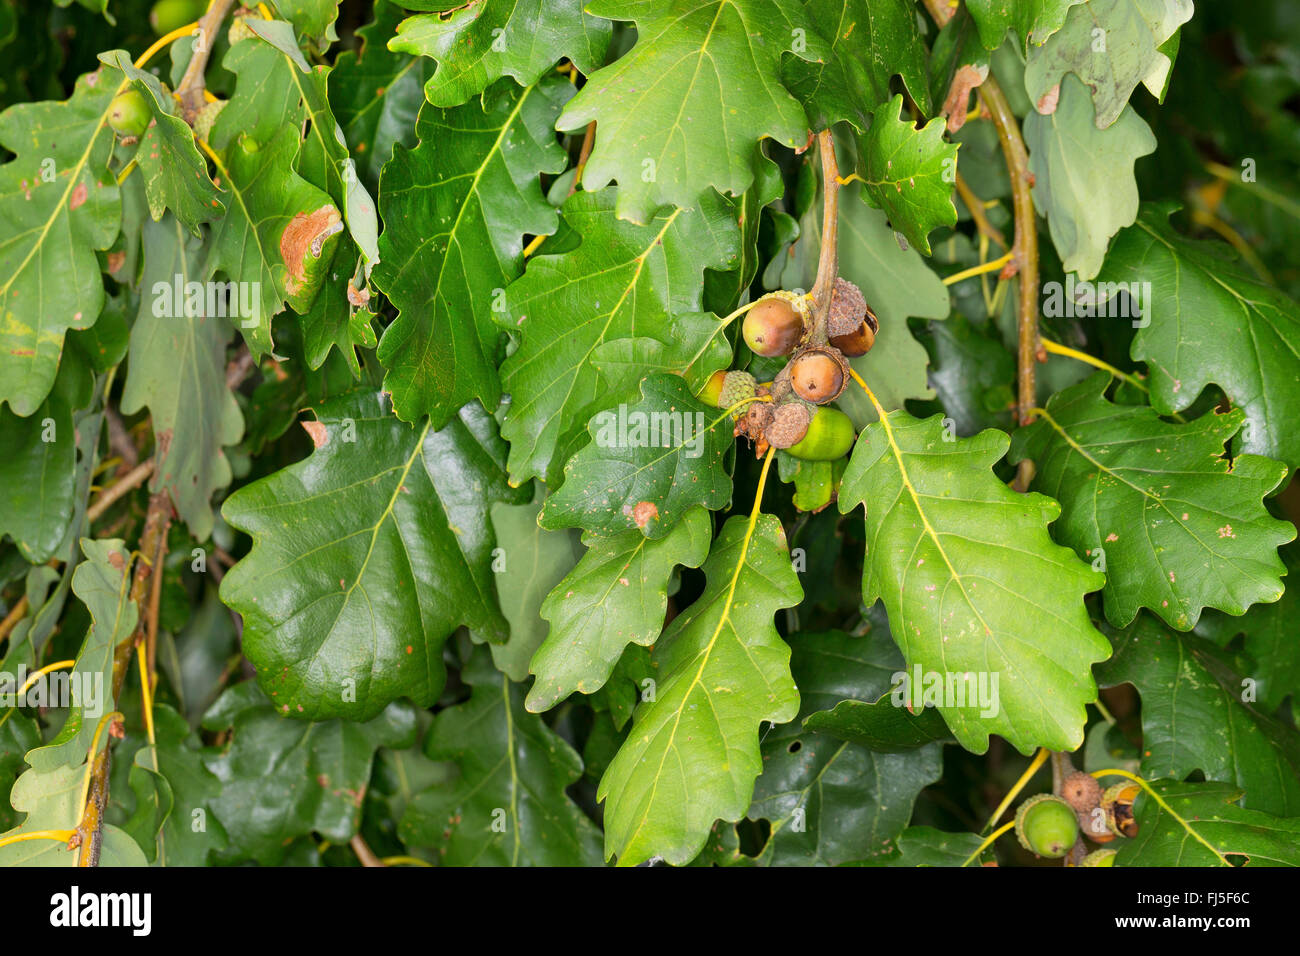 Sessile oak (Quercus petraea), branch with fruits, Germany Stock Photo